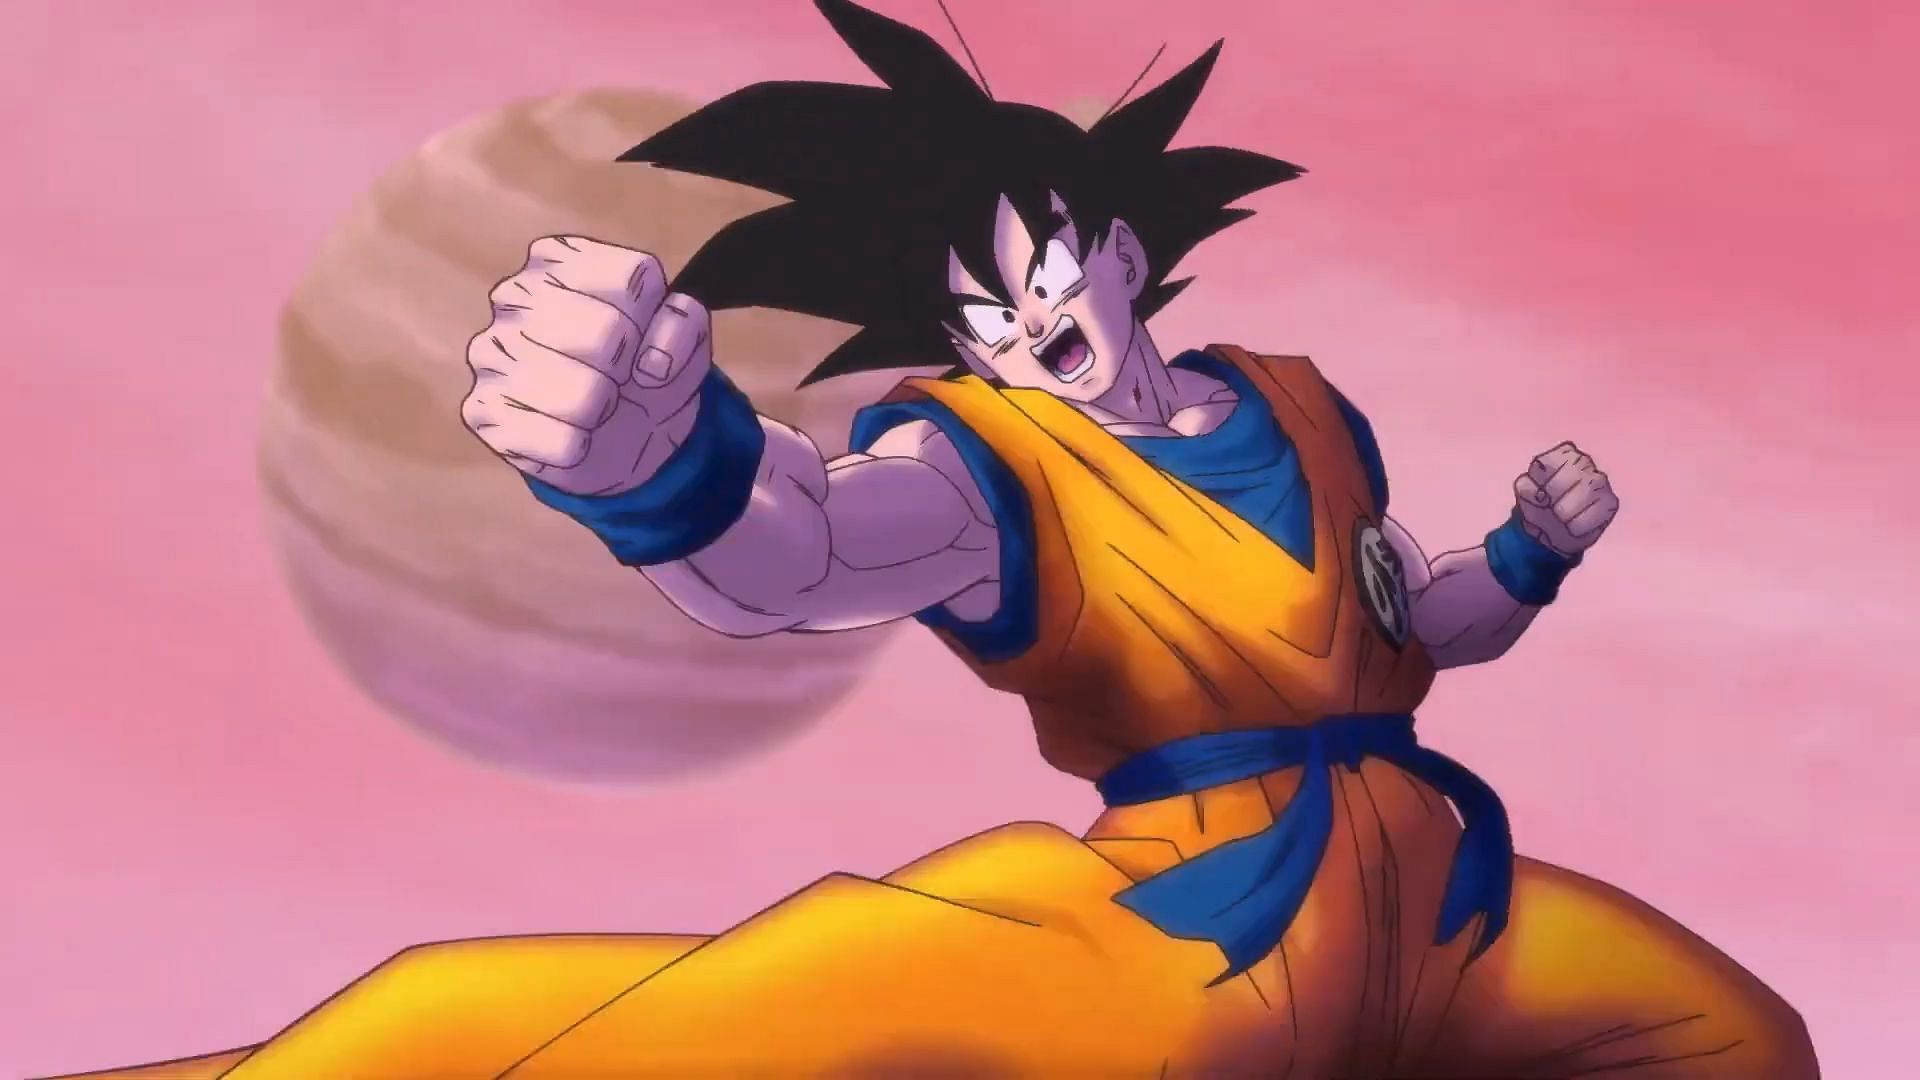 Goku as seen in the upcoming film&#039;s trailer (Image via Toei Animation)